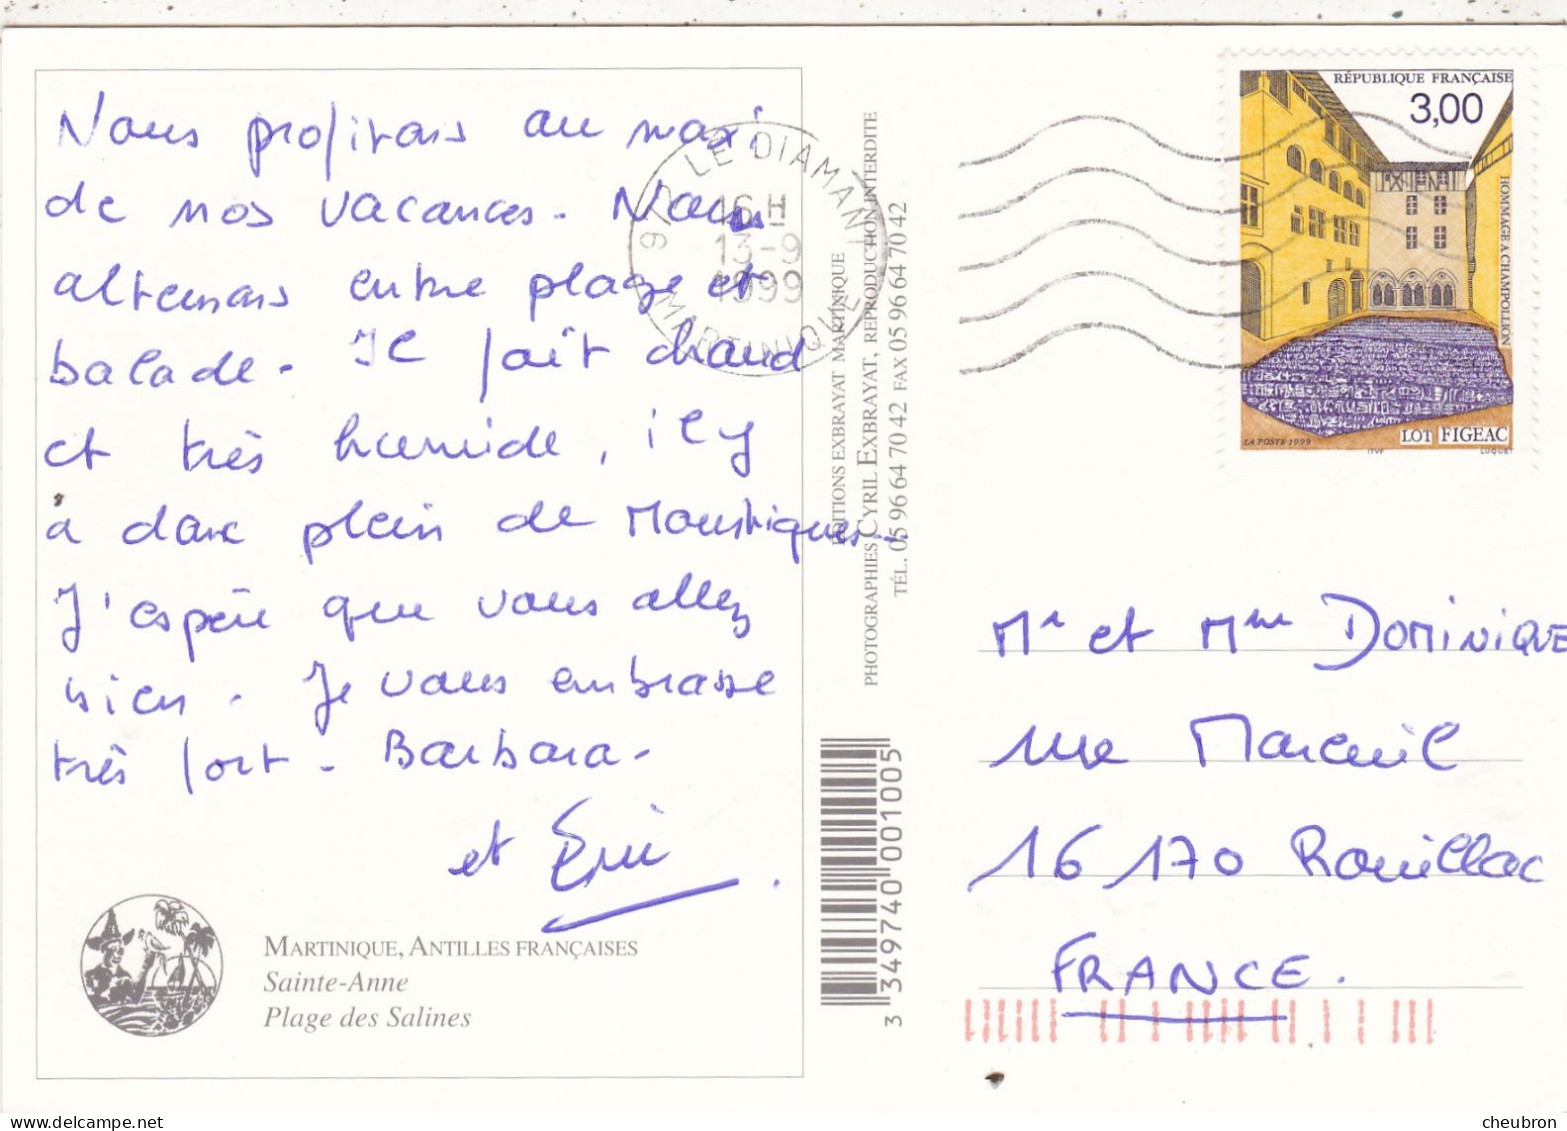 MARTINIQUE. SAINTE ANNE.  PLAGE DES SALINES. DIFFERENTS ASPECTS. ANNEE 1999 + TEXTE + TIMBRE FIGEAC - Other & Unclassified